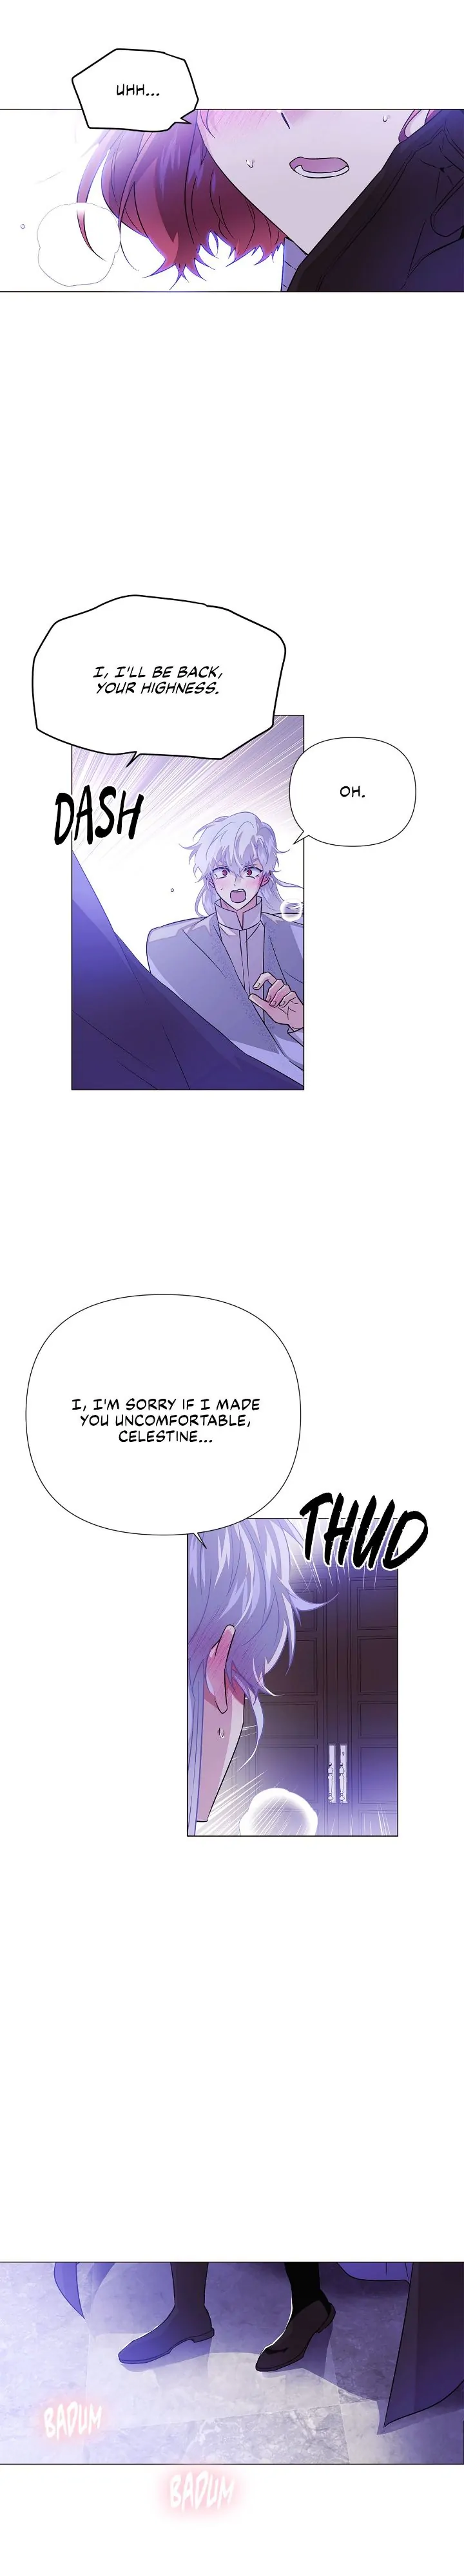 The Villain Discovered My Identity - Chapter 122 Page 7